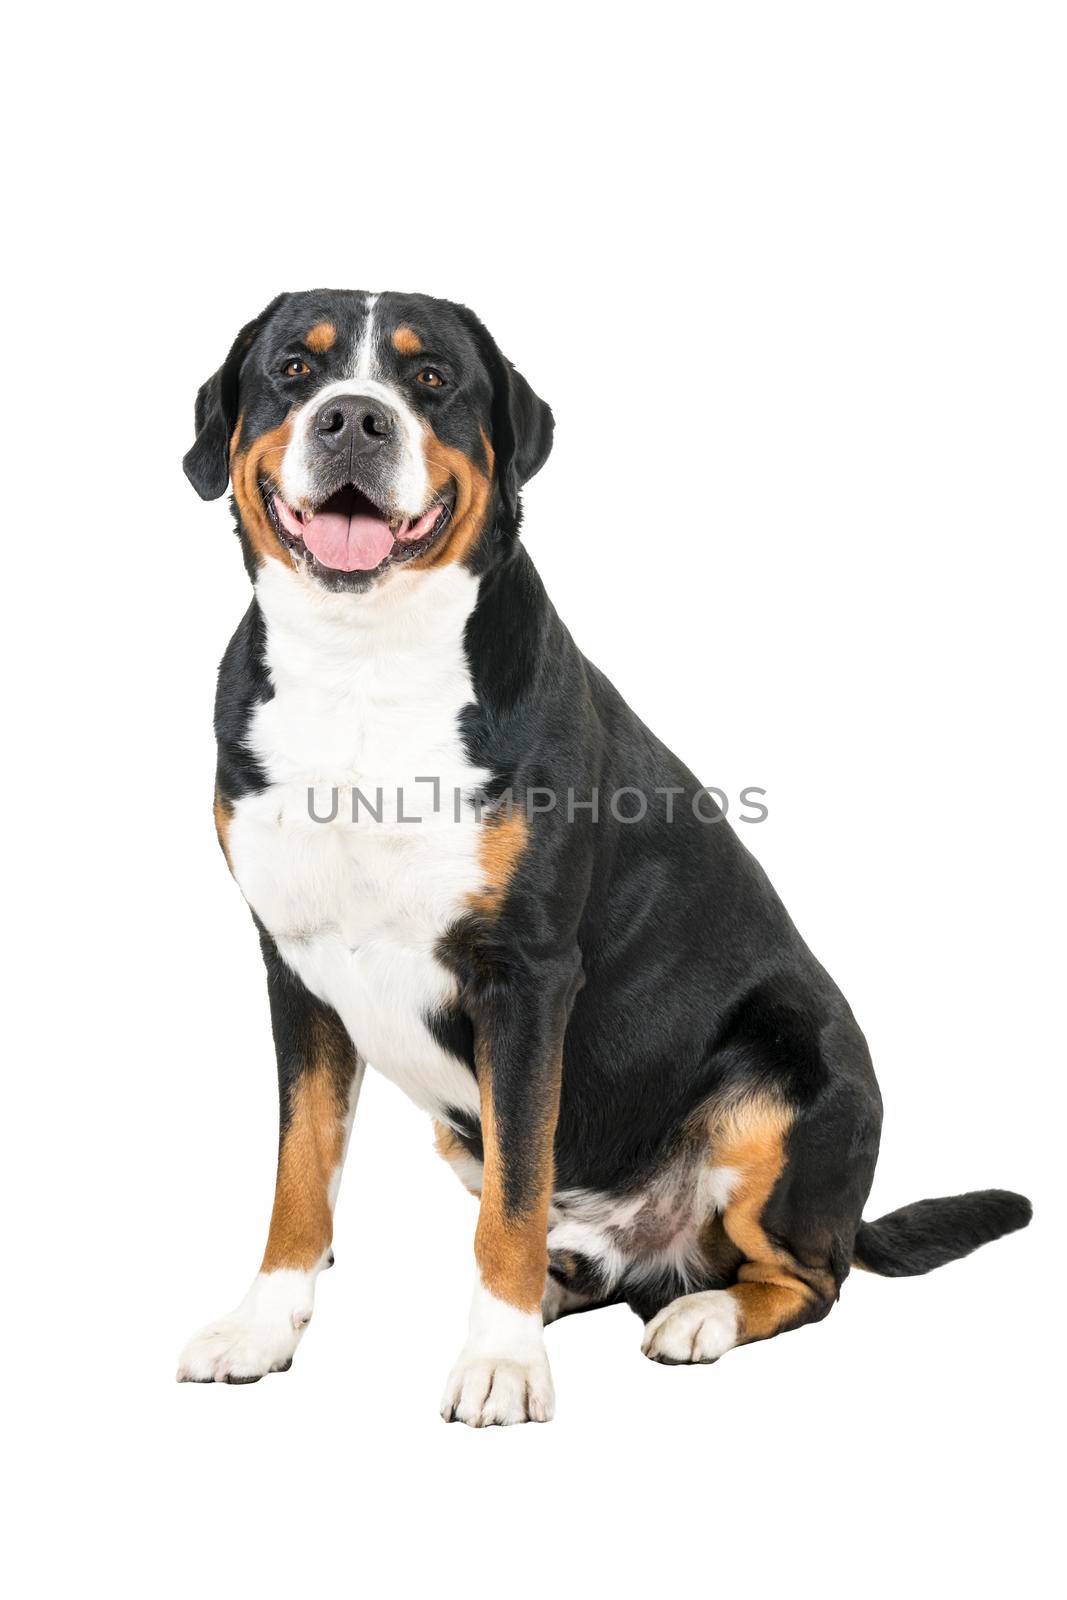 Greater Swiss Mountain Dog sitting side ways and looking into the camera by LeoniekvanderVliet